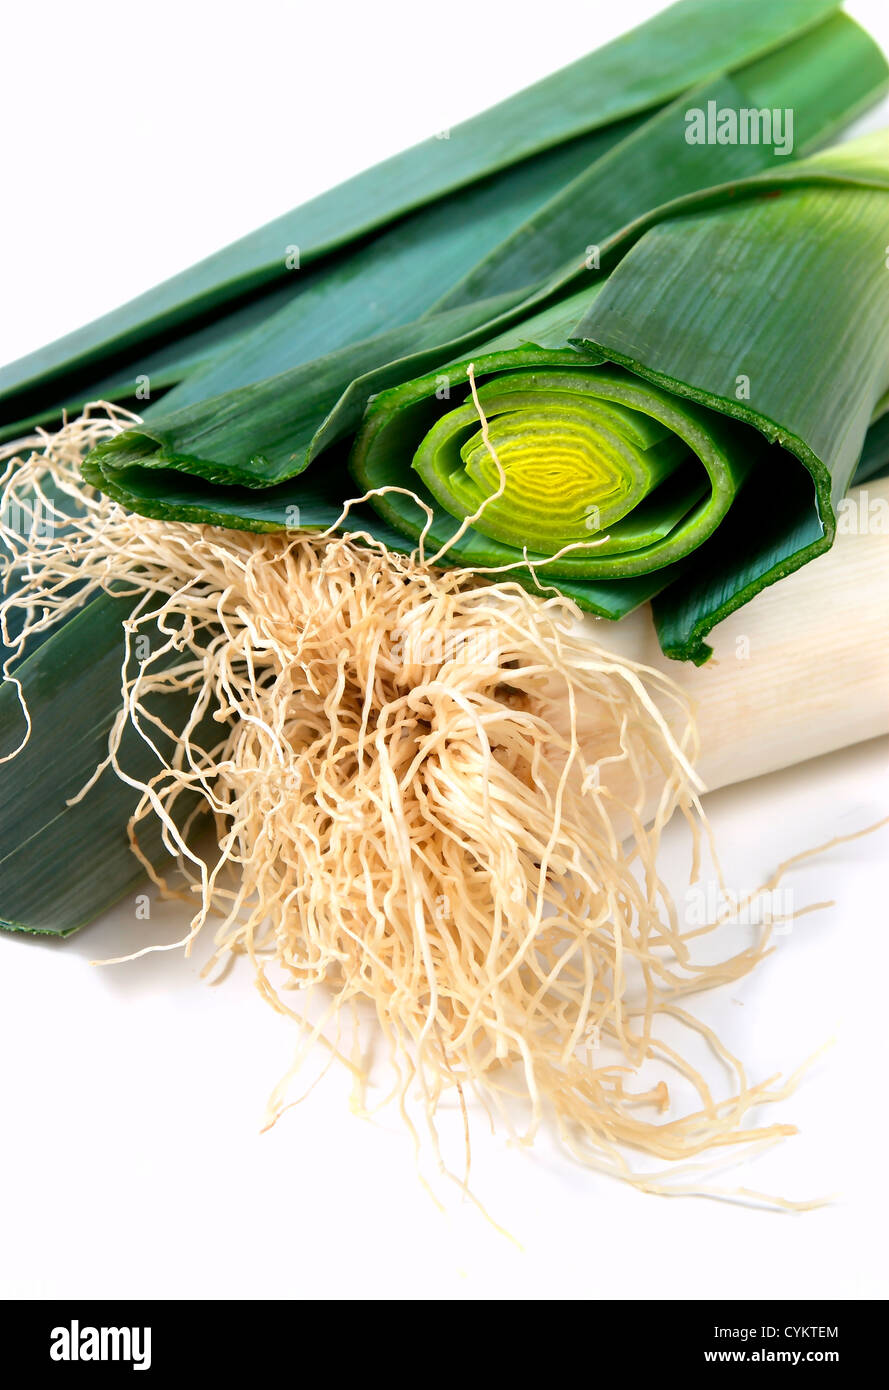 fresh leek cuted for cooking Stock Photo